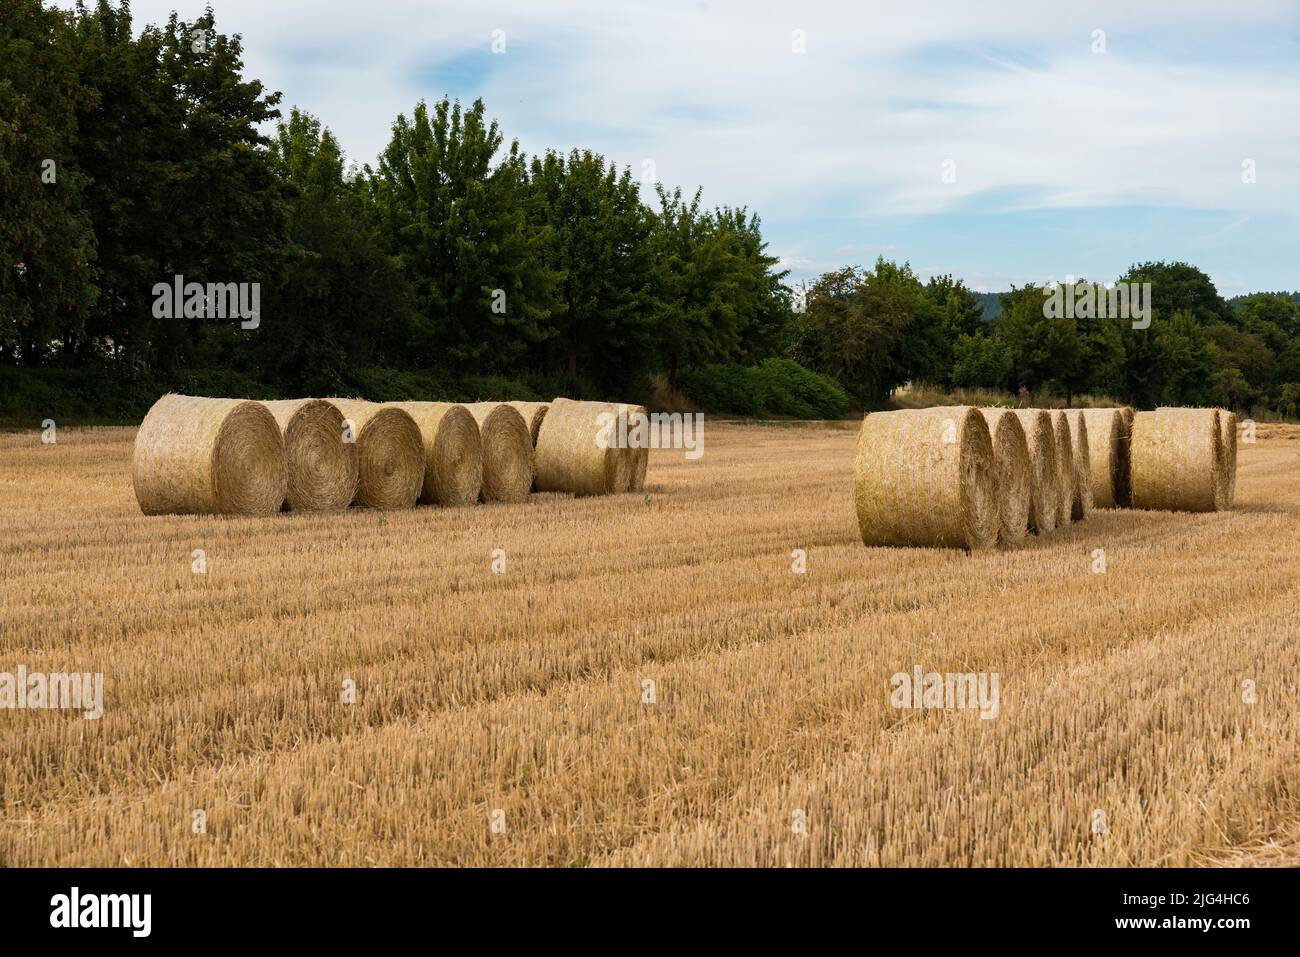 Hay rolls and a mowed agriculture grain field, Kirsch, Germany Stock Photo